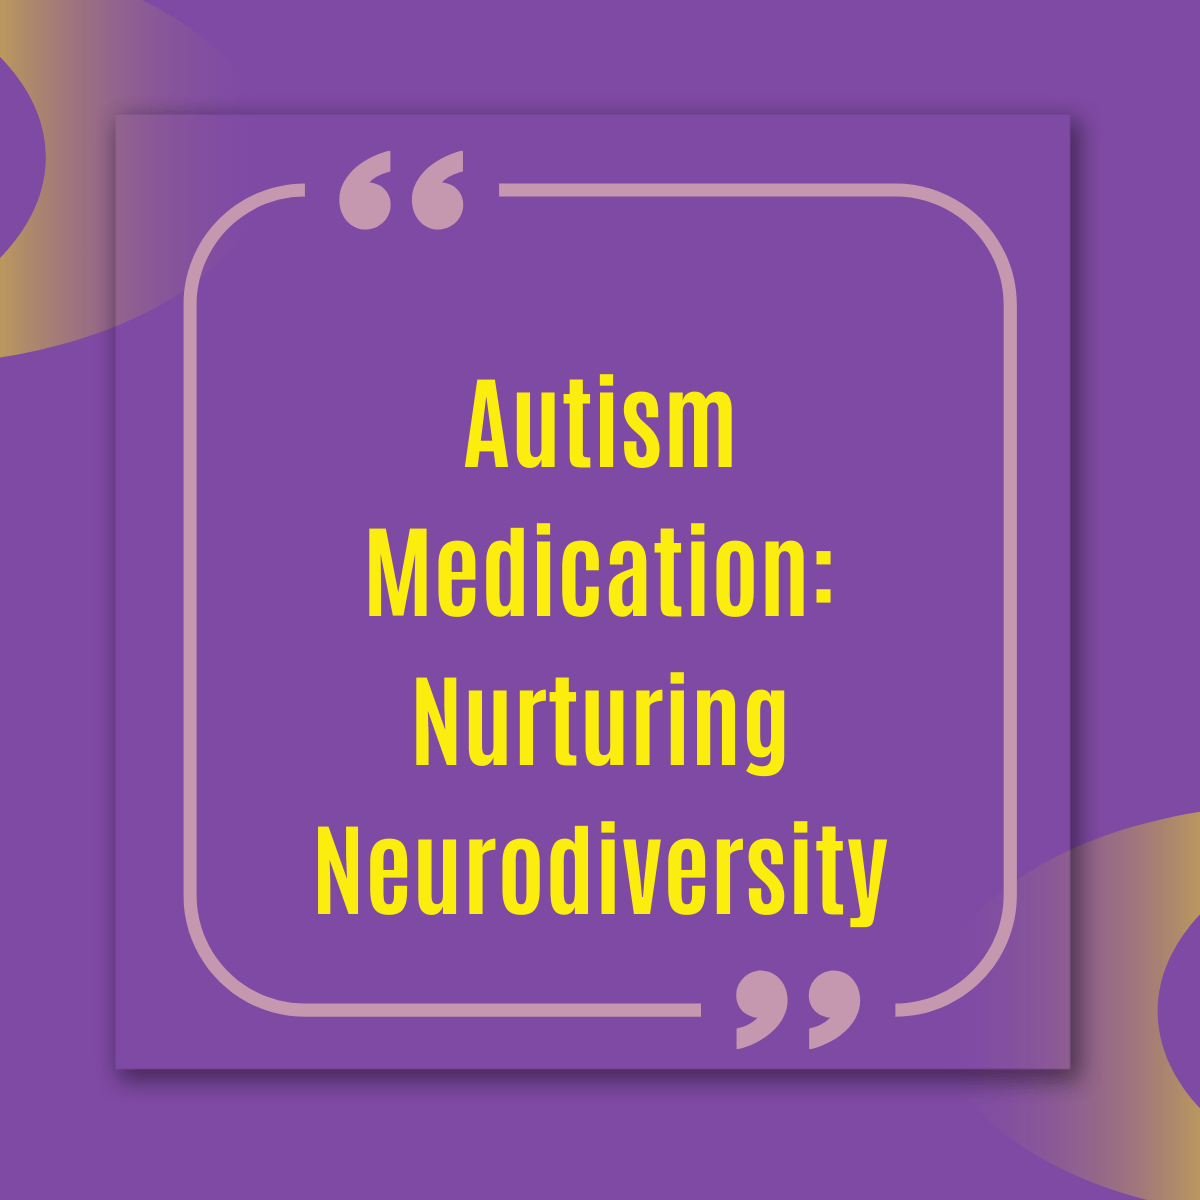 Medications for Autism